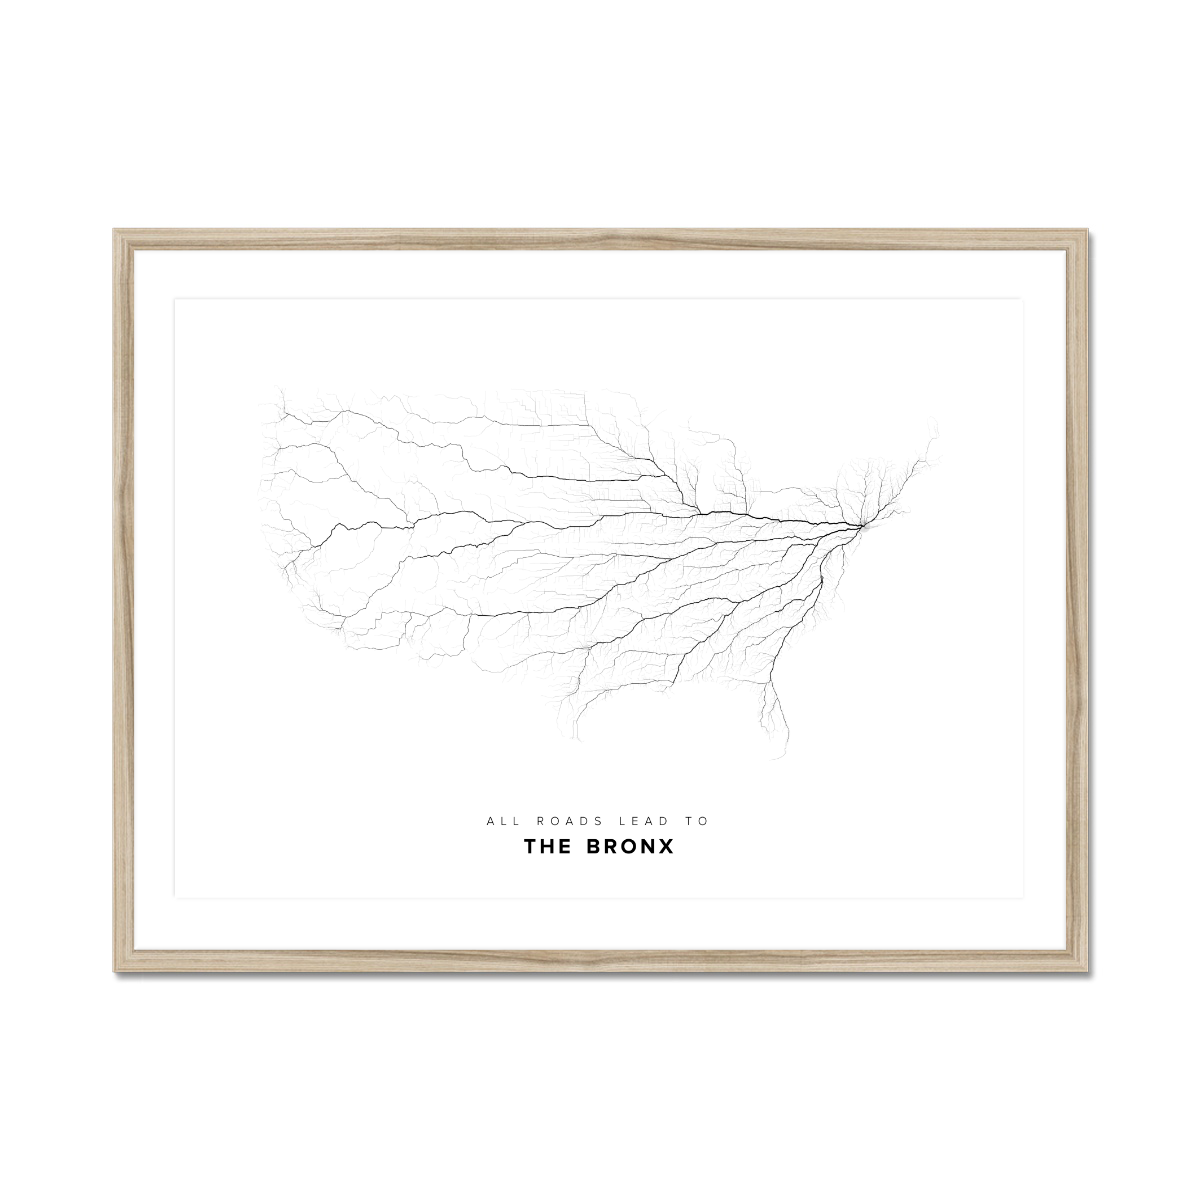 All roads lead to The Bronx (United States of America) Fine Art Map Print